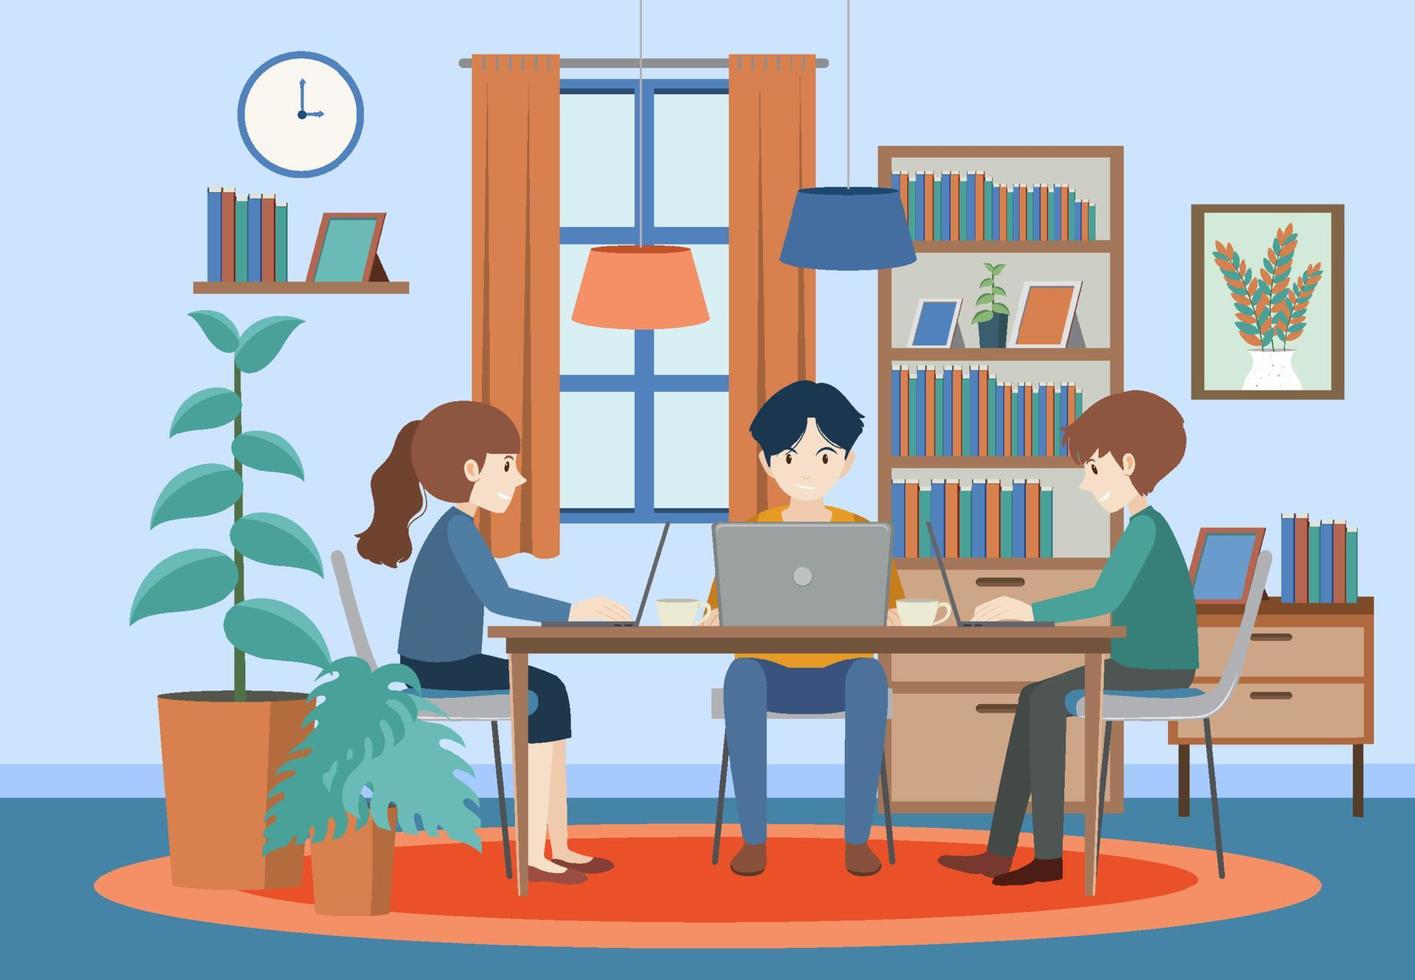 People working on computer at home vector